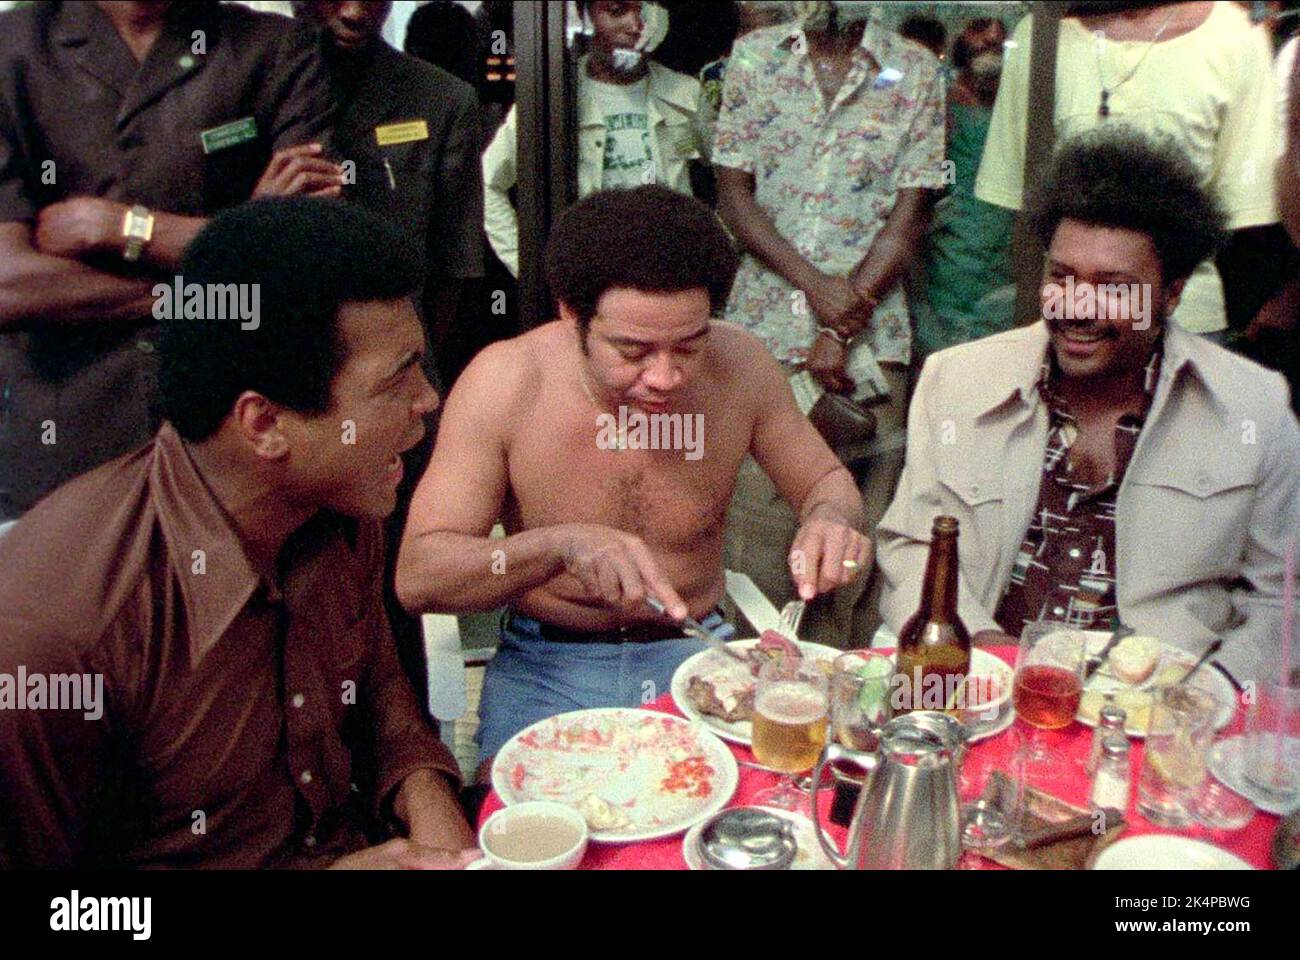 MUHAMMAD ALI, Bill Withers, DON KING, SOUL POWER, 2008 Stockfoto